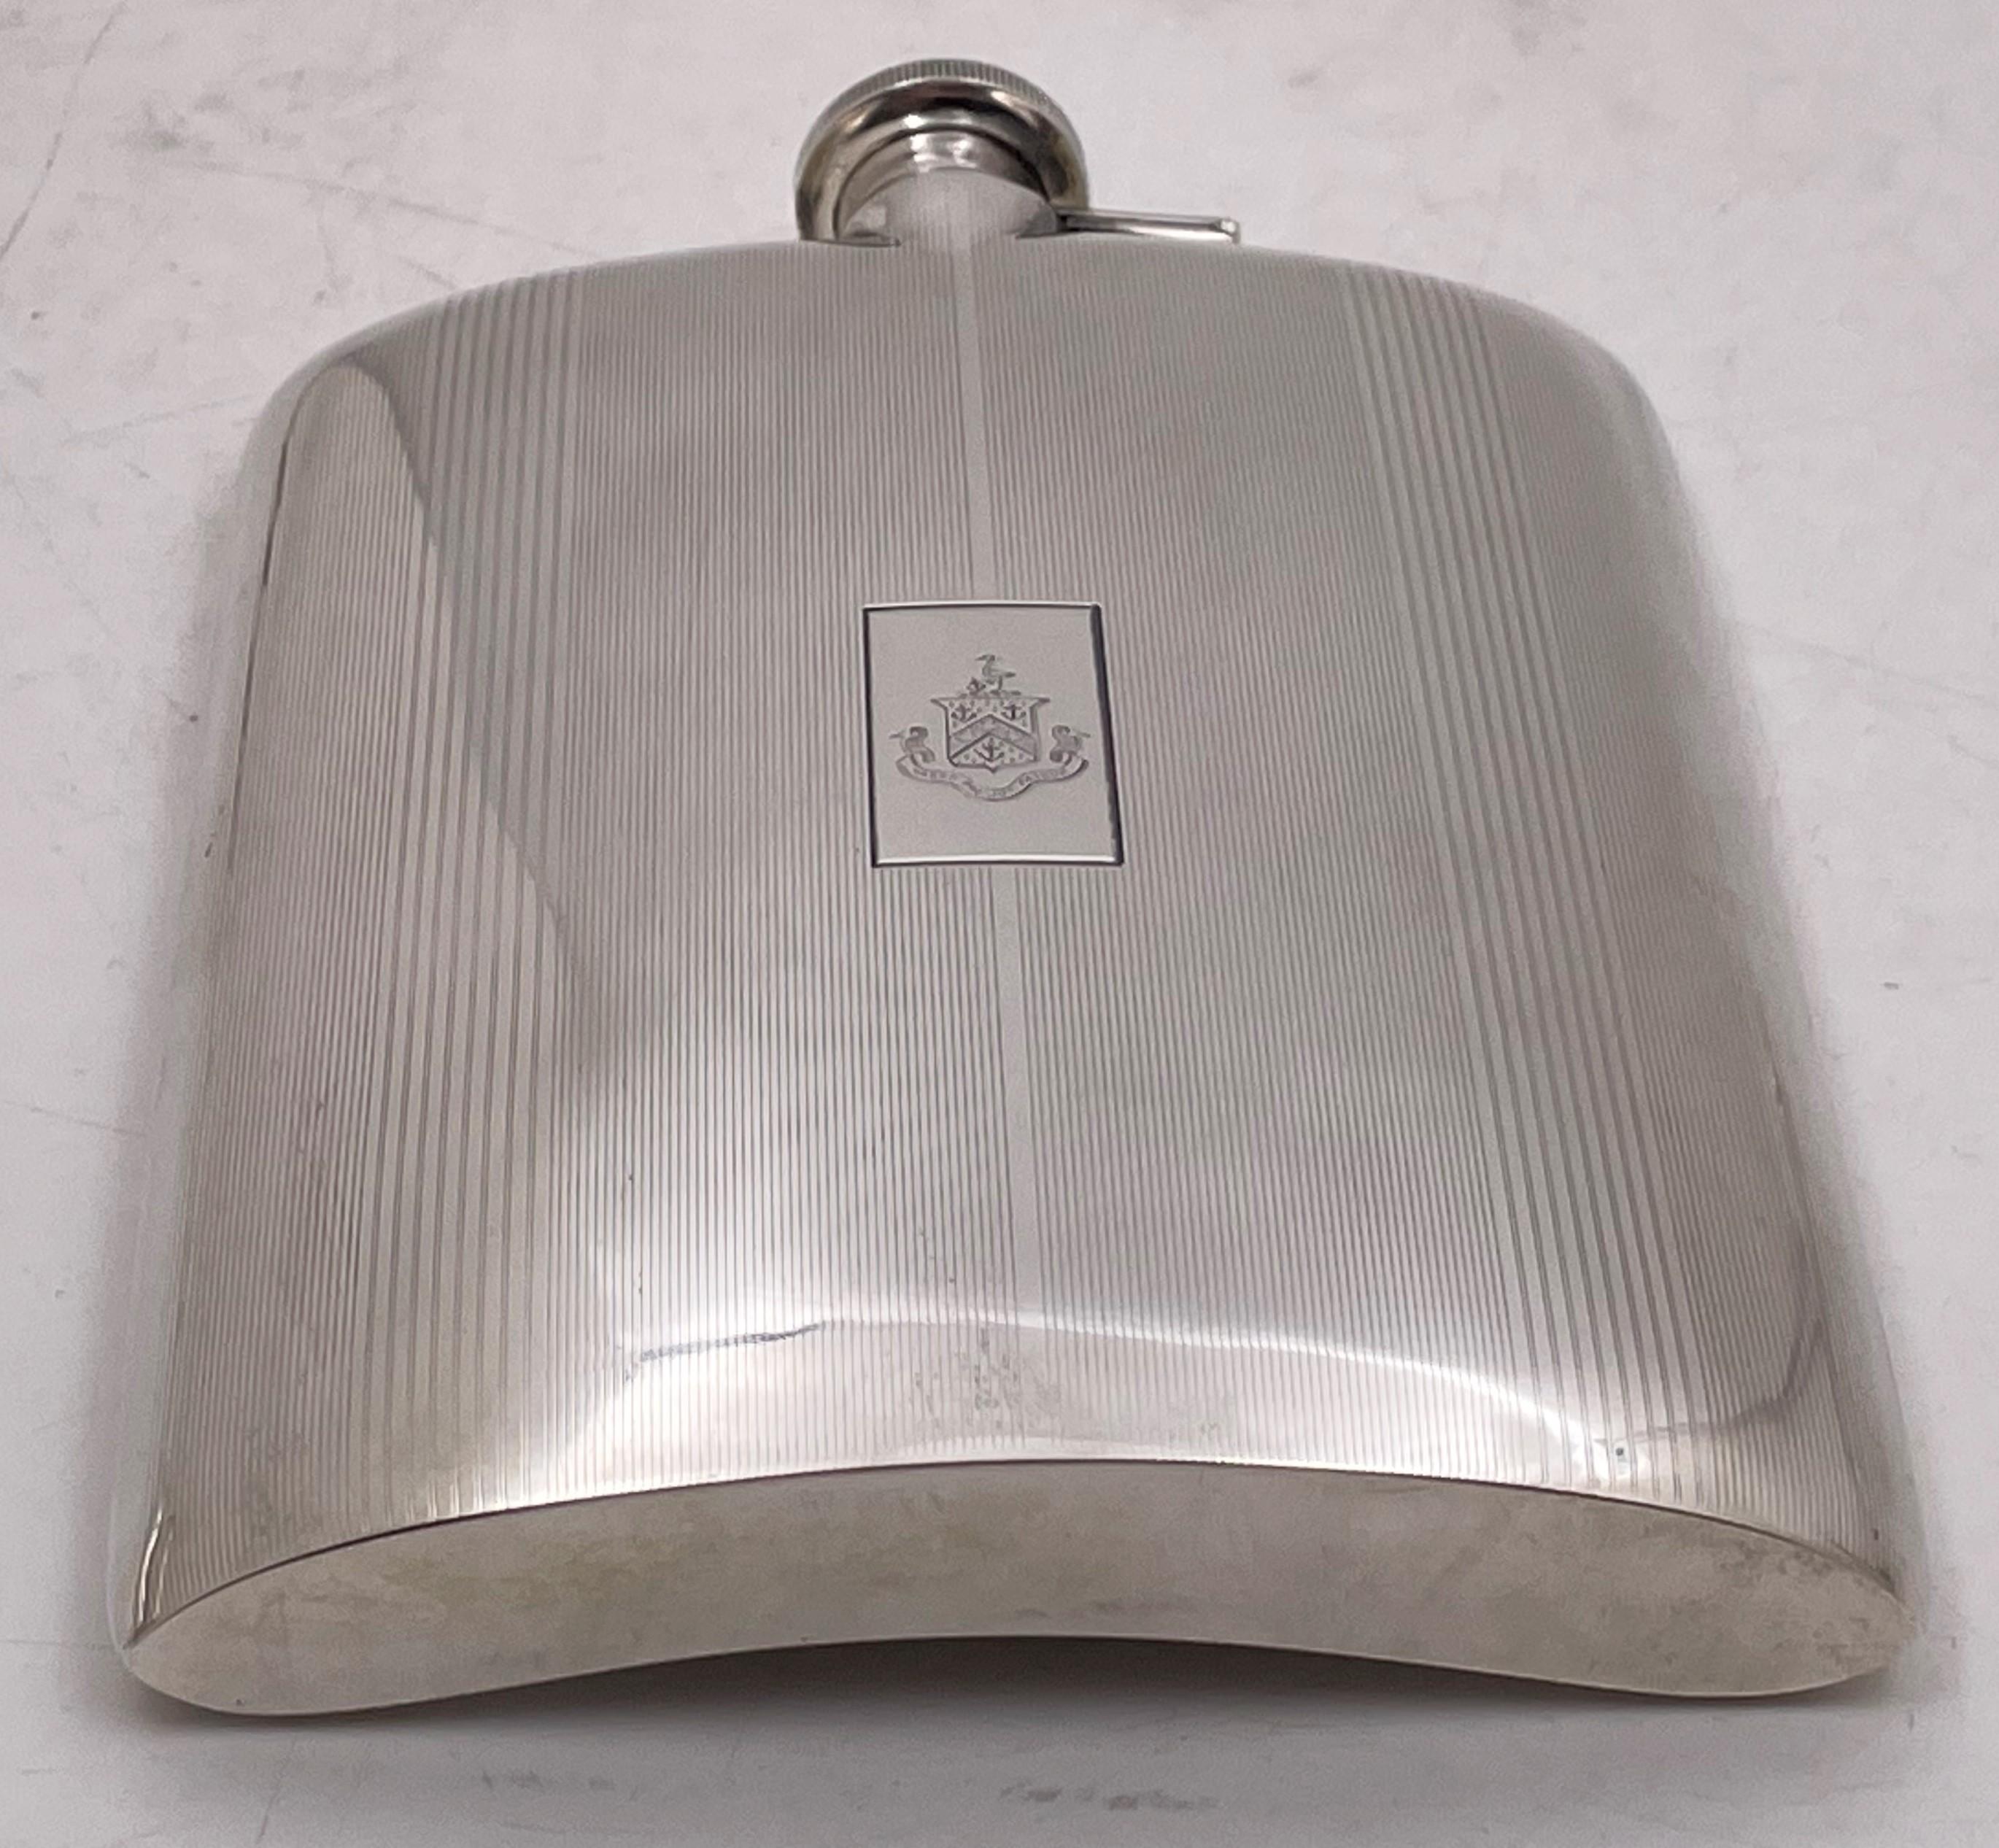 Black, Starr & Frost sterling silver flask from the early 20th century and in Art Deco style with an elegant, geometric design. It measures 6 3/4'' in height by 5 1/8'' in width by 1'' in depth, and bears hallmarks as shown. 

The oldest